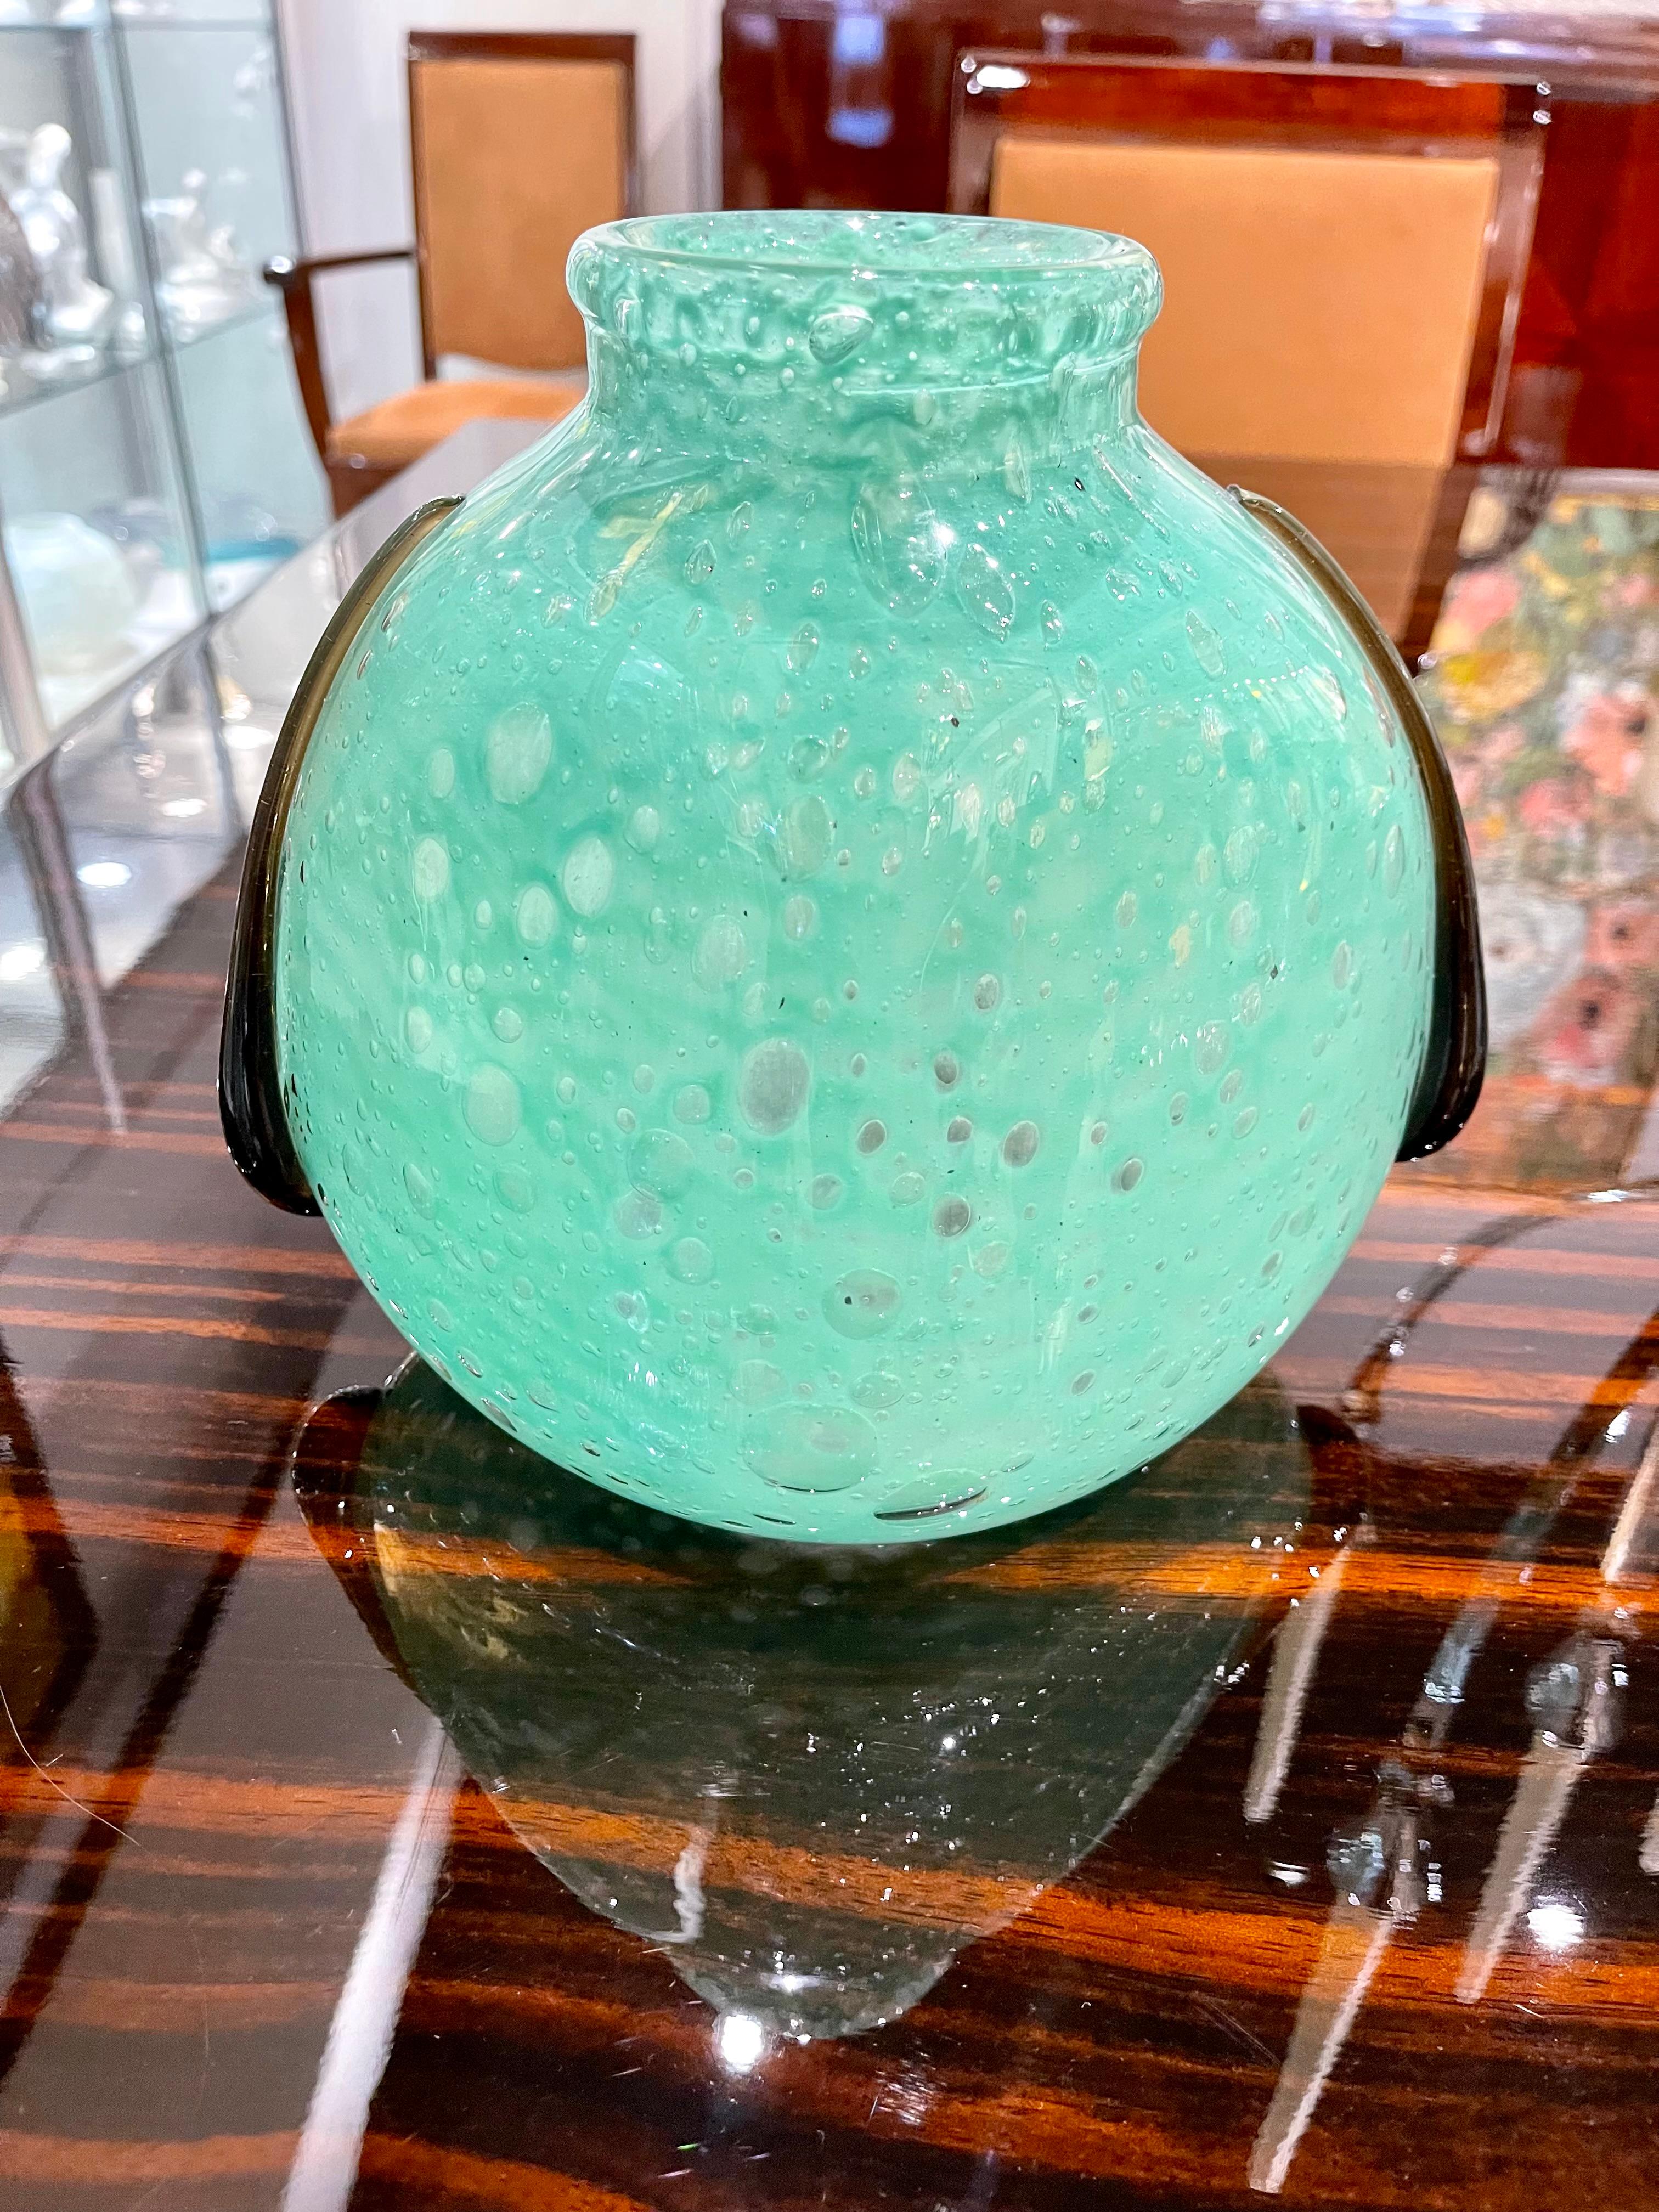 Art Deco glass by Charles Schneider part of Larmes (Tears) series in beautiful green jade color with deep smoky colored glass tears decoration along the body.
Made in France.
Circa: 1925
Signature: 